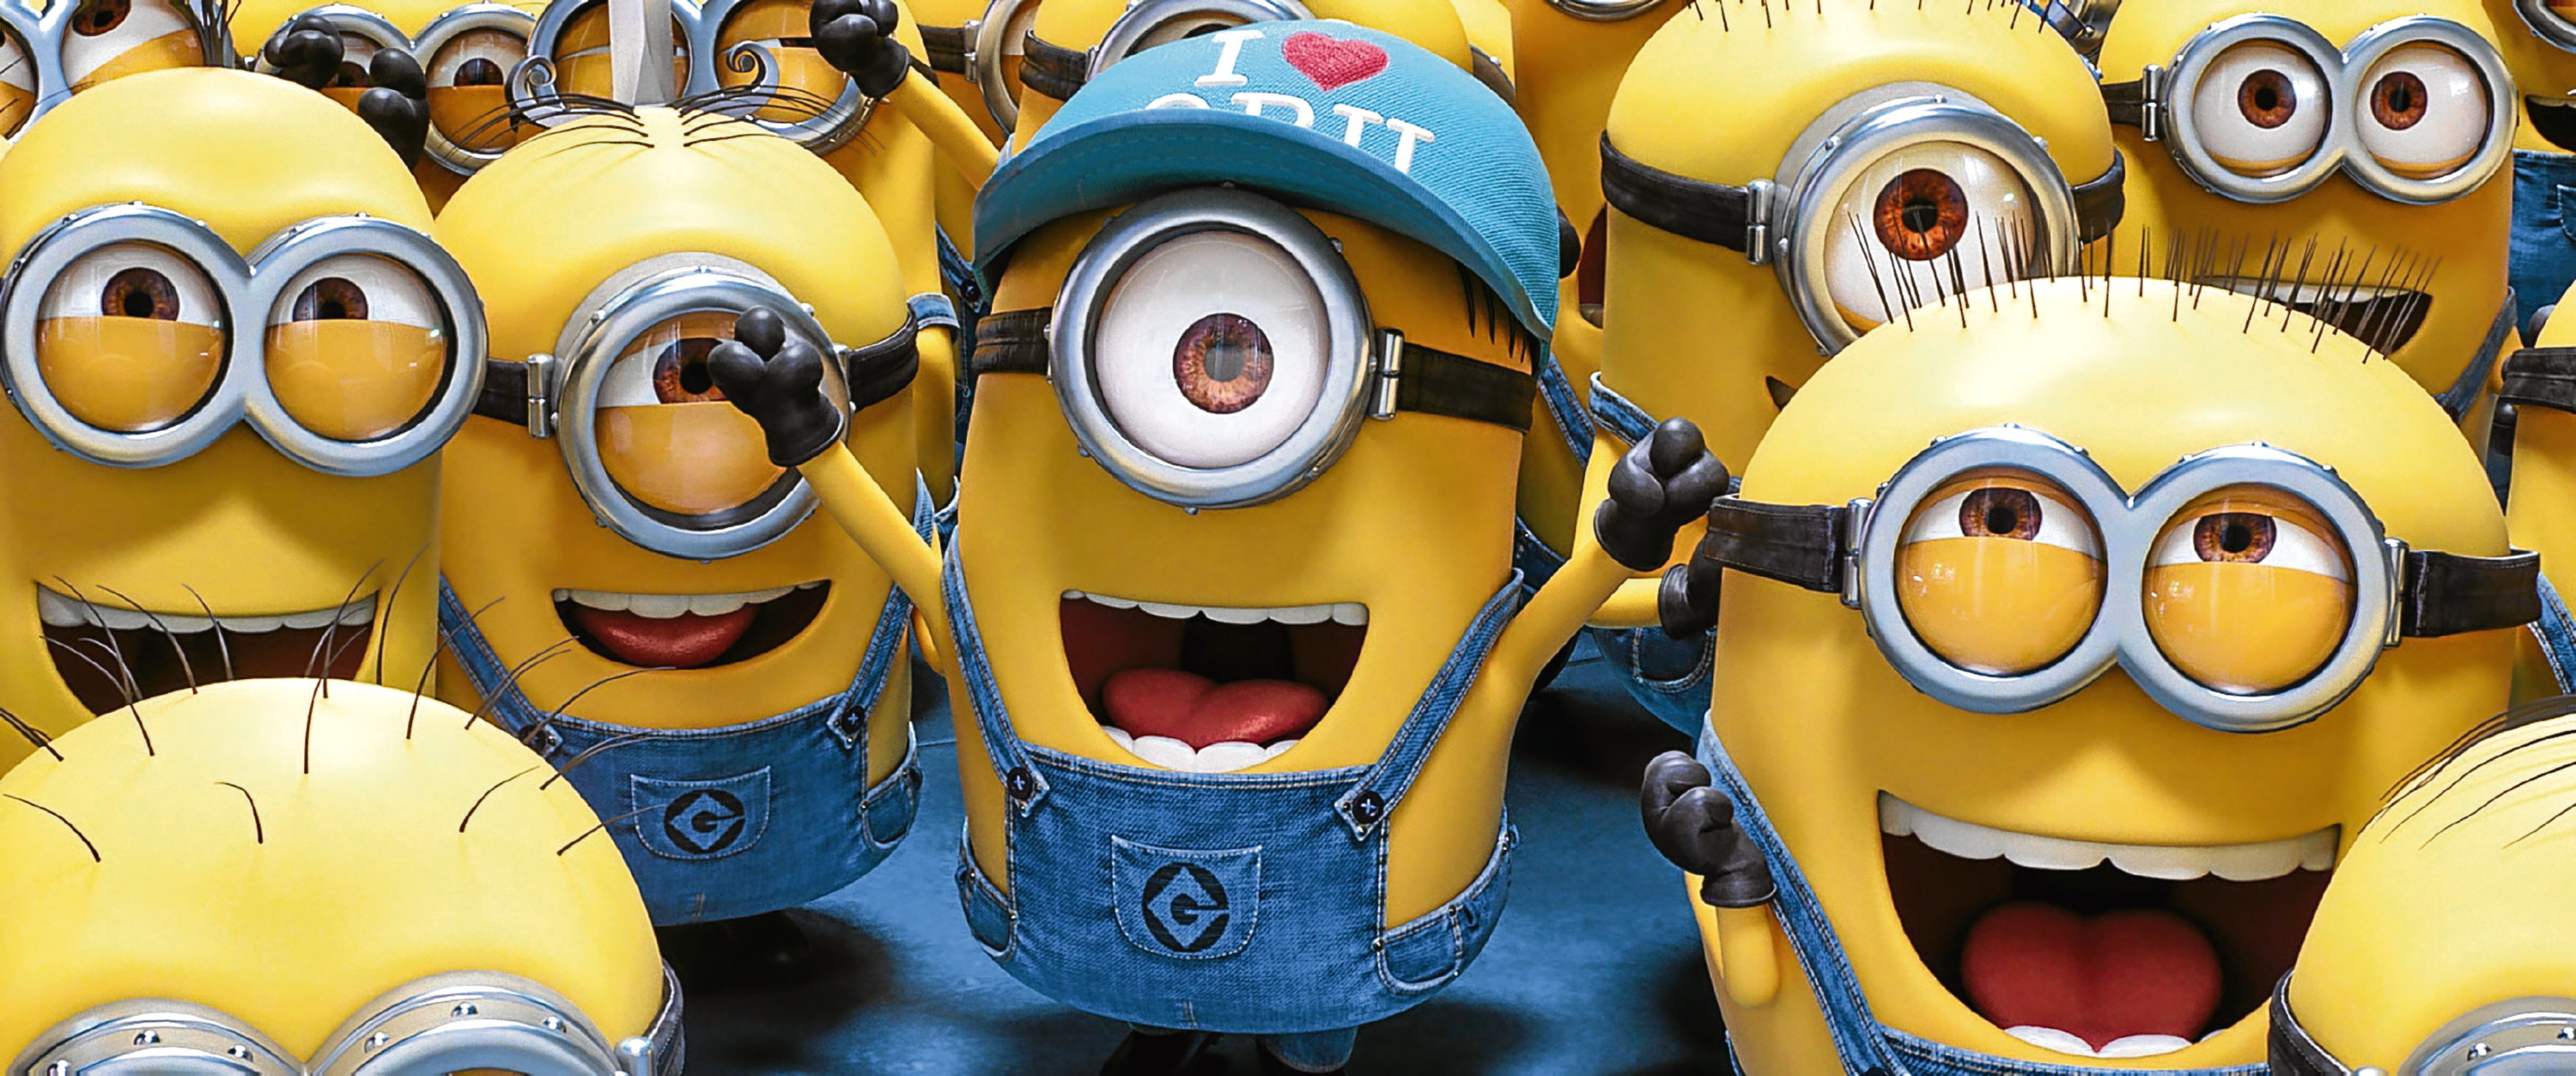 Despicable Me 3 arrives in cinemas this summer (PA)